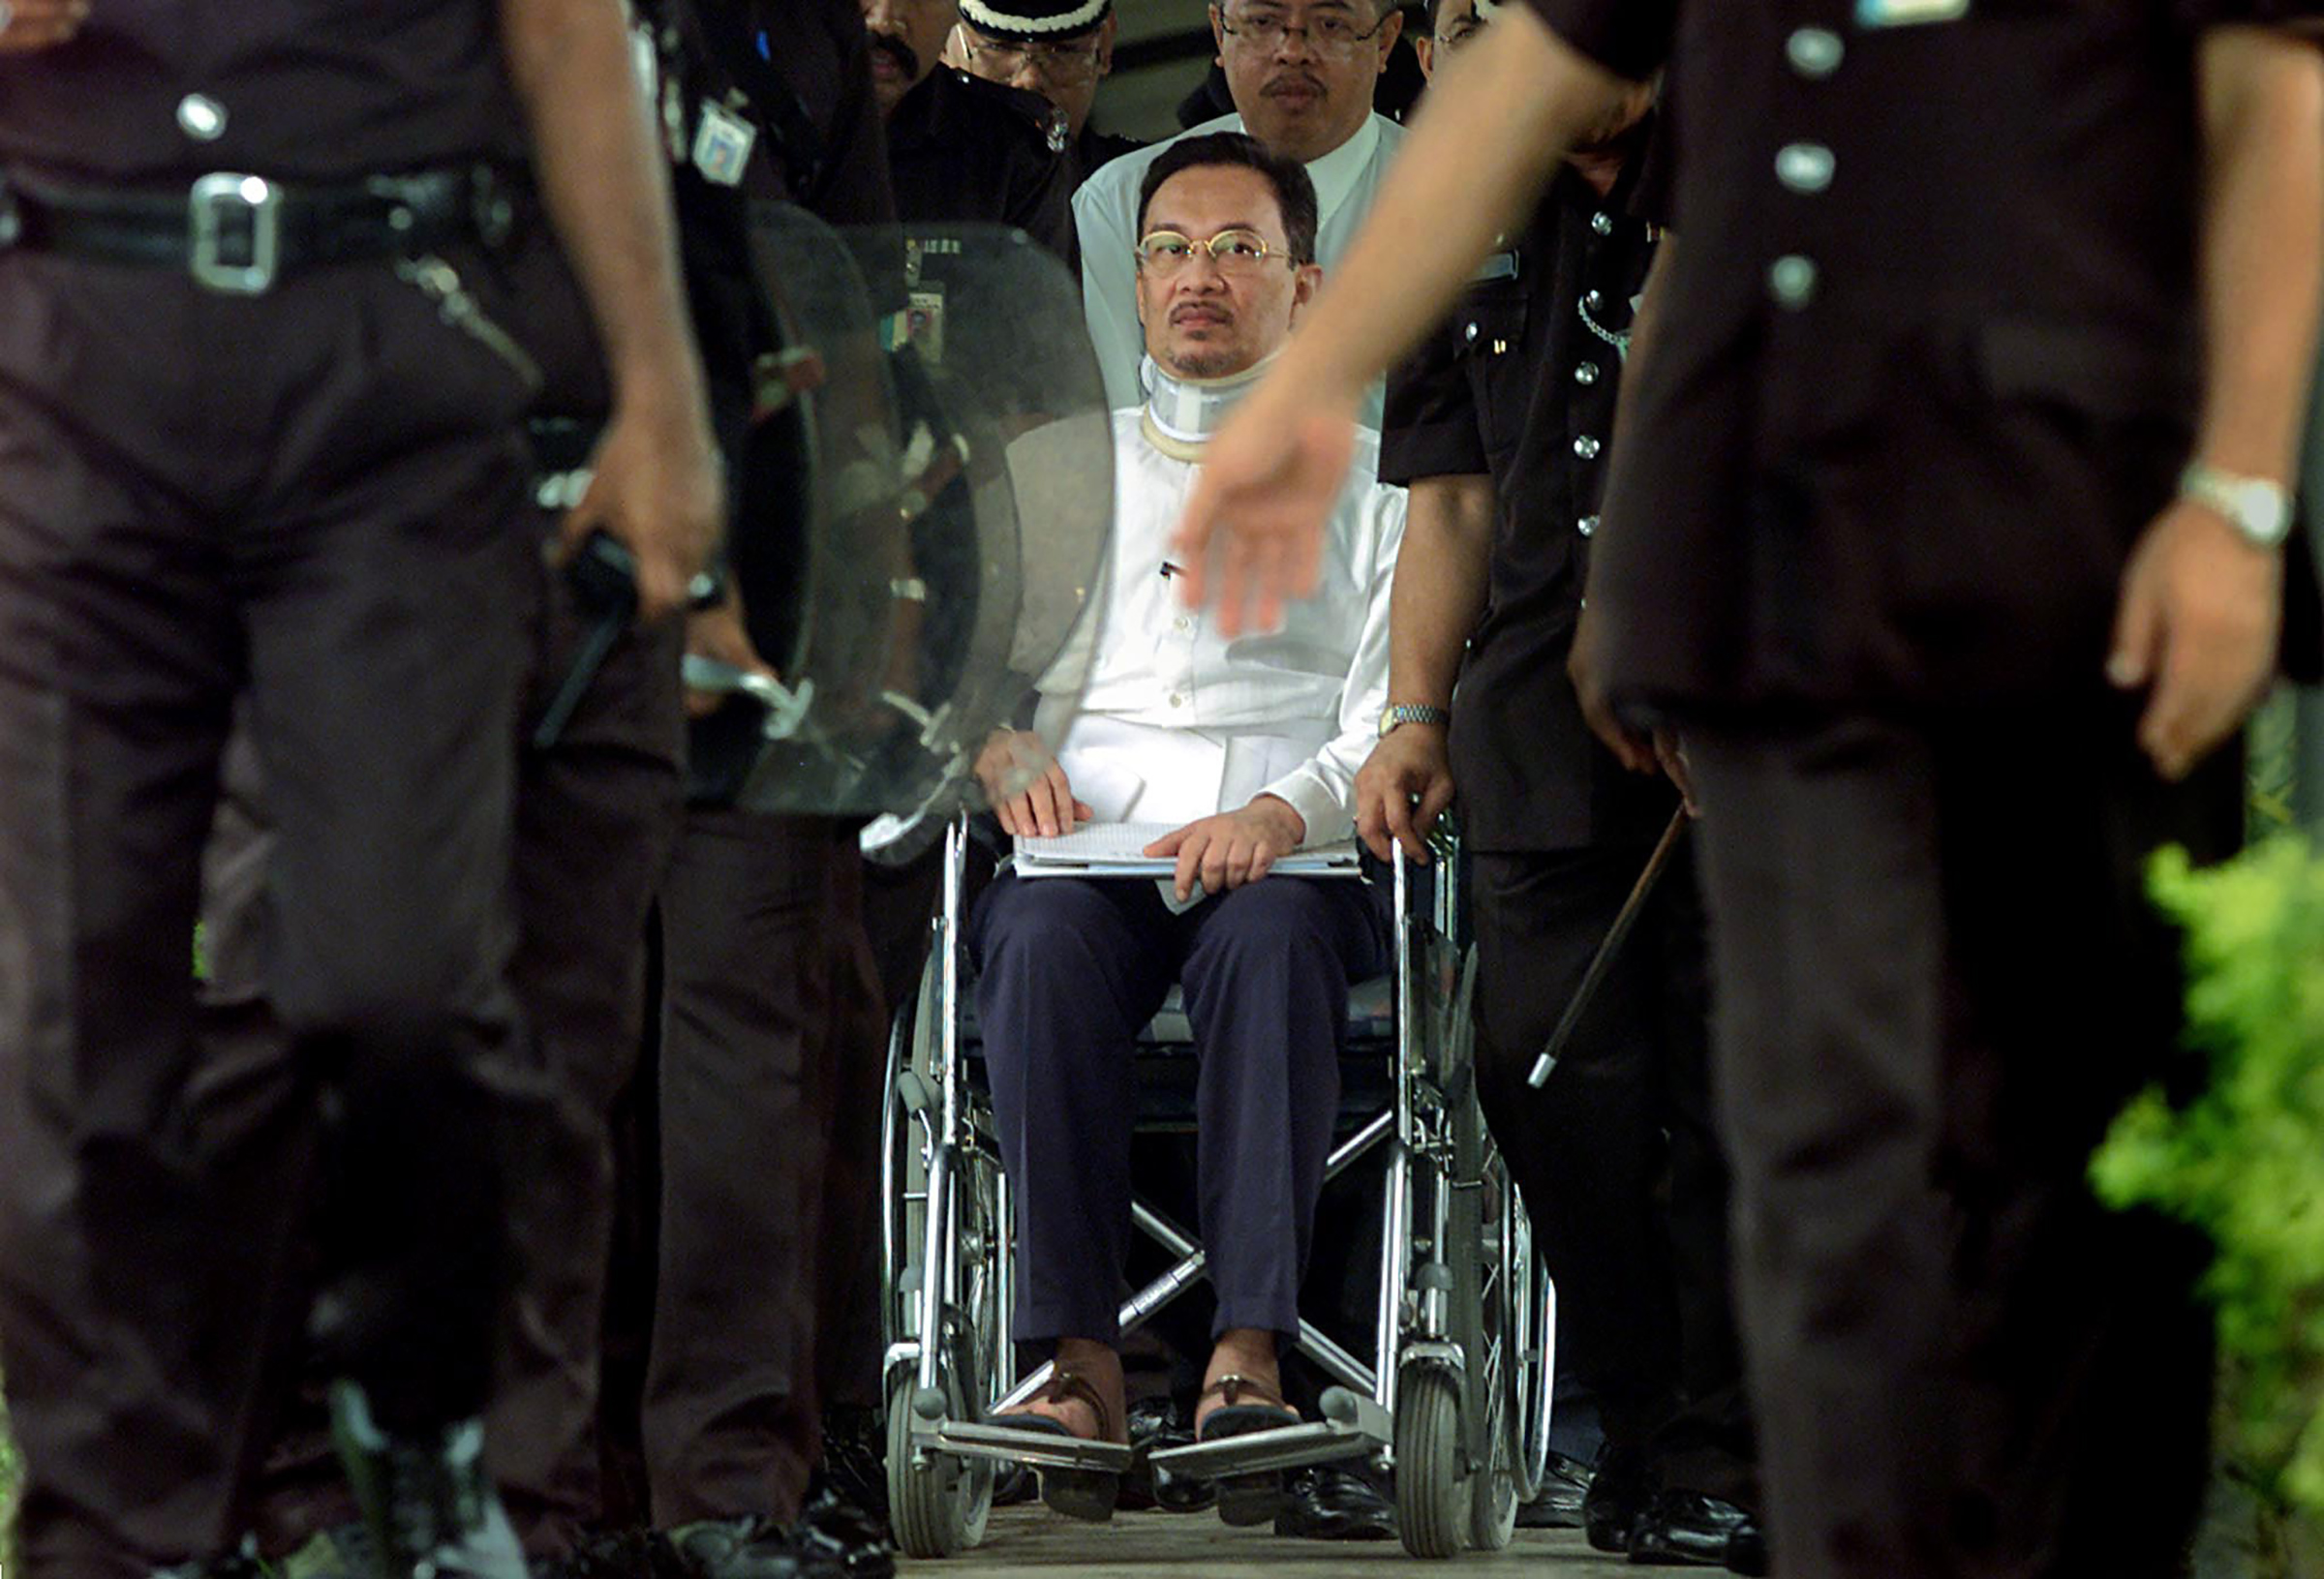 Anwar Ibrahim at Sungai Buloh Prison on May 12, 2001. Anwar was sacked as deputy PM in 1998 and indicted on abuse of power and sodomy charges he says were made up after a clash with Prime Minister Mahathir Mohamad. His convictions were overturned and pardoned, and he became Prime Minister in 2022. (Reuters)